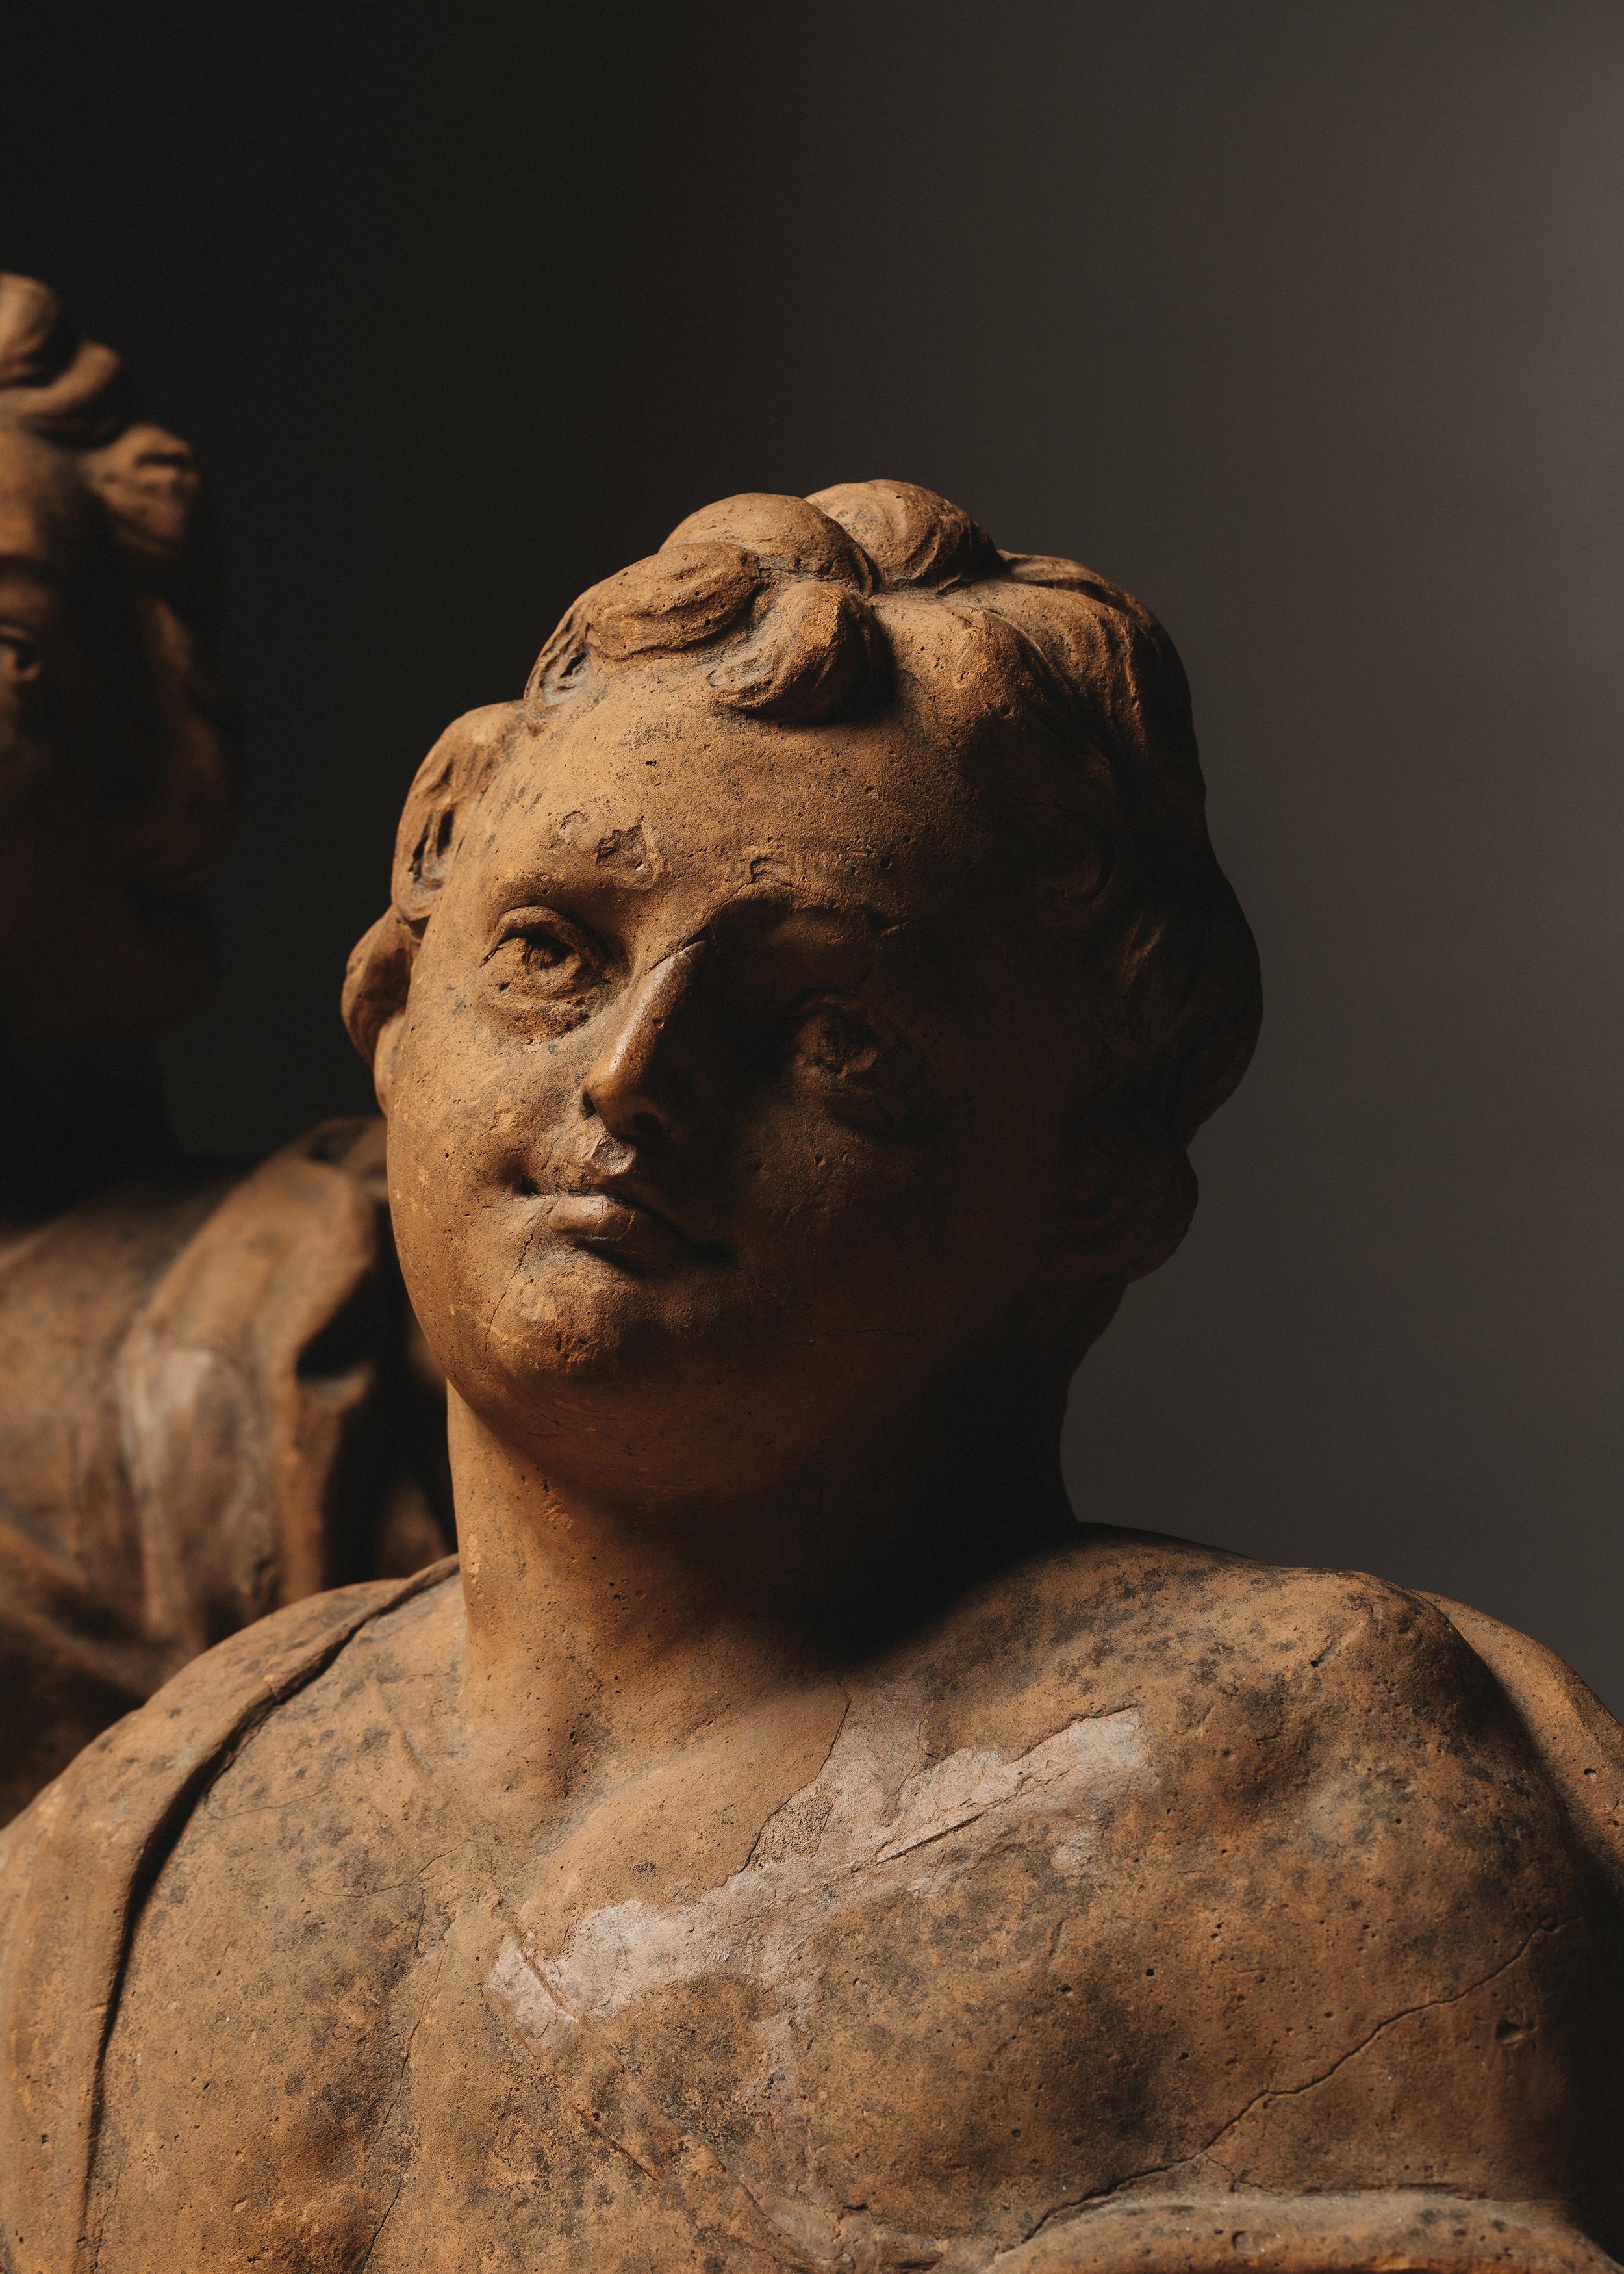 Transport your imagination to the splendor of the 18th century with our captivating pair of terracotta busts, straight from the French elegance of the era. These delicate figures capture the essence of nobility and the distinctive charm of the